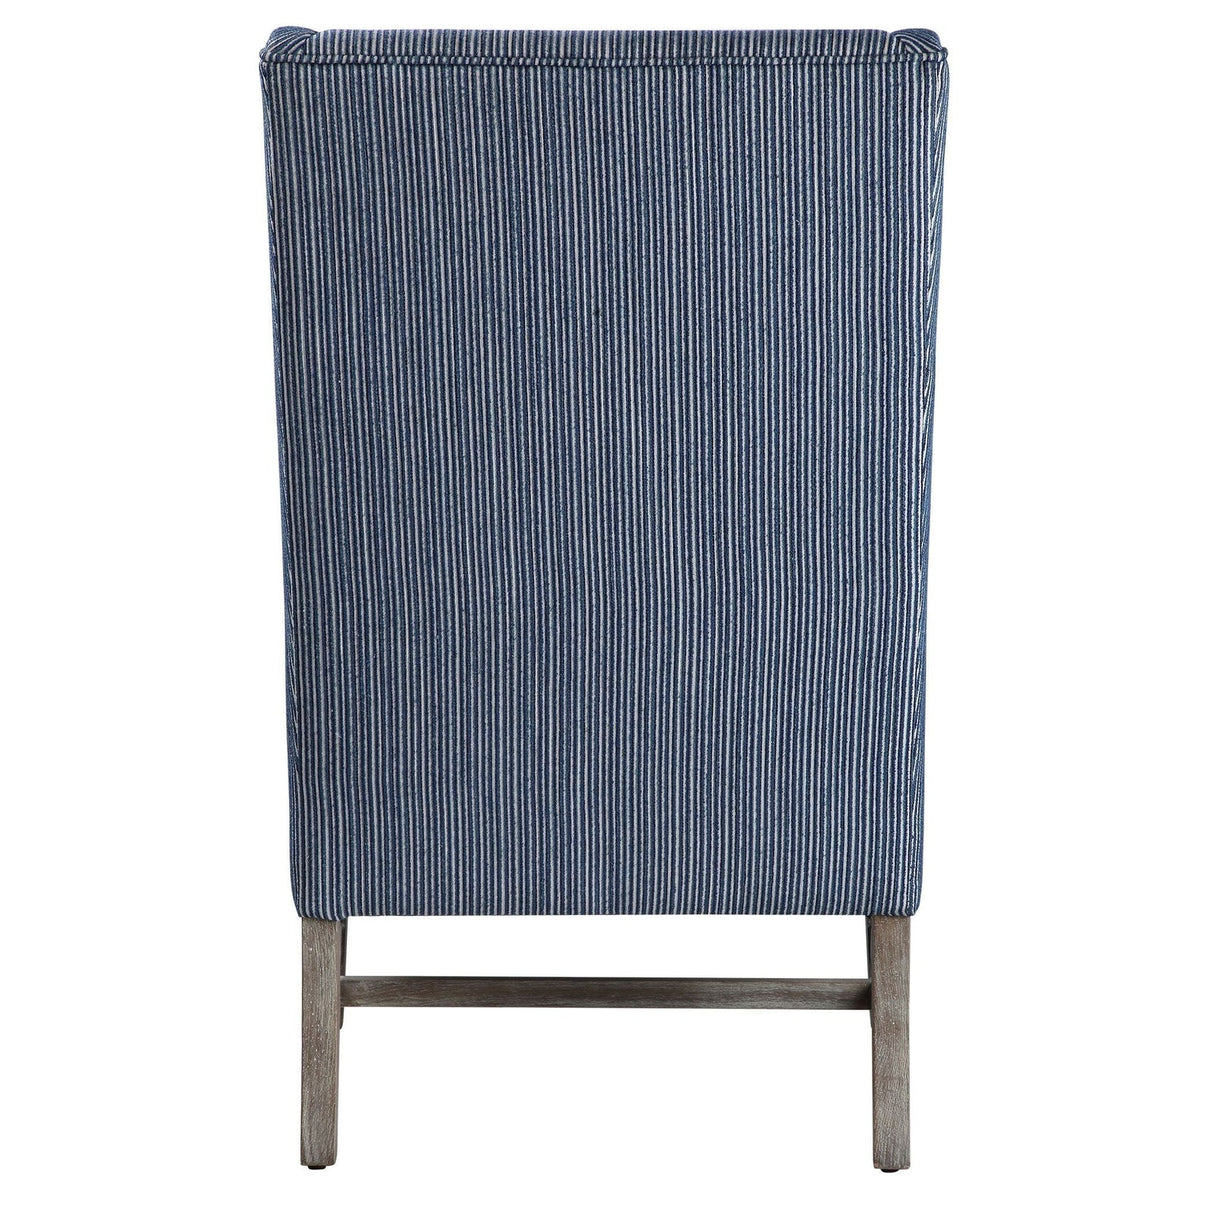 Uttermost Galiot Wingback Accent Chair - Home Elegance USA